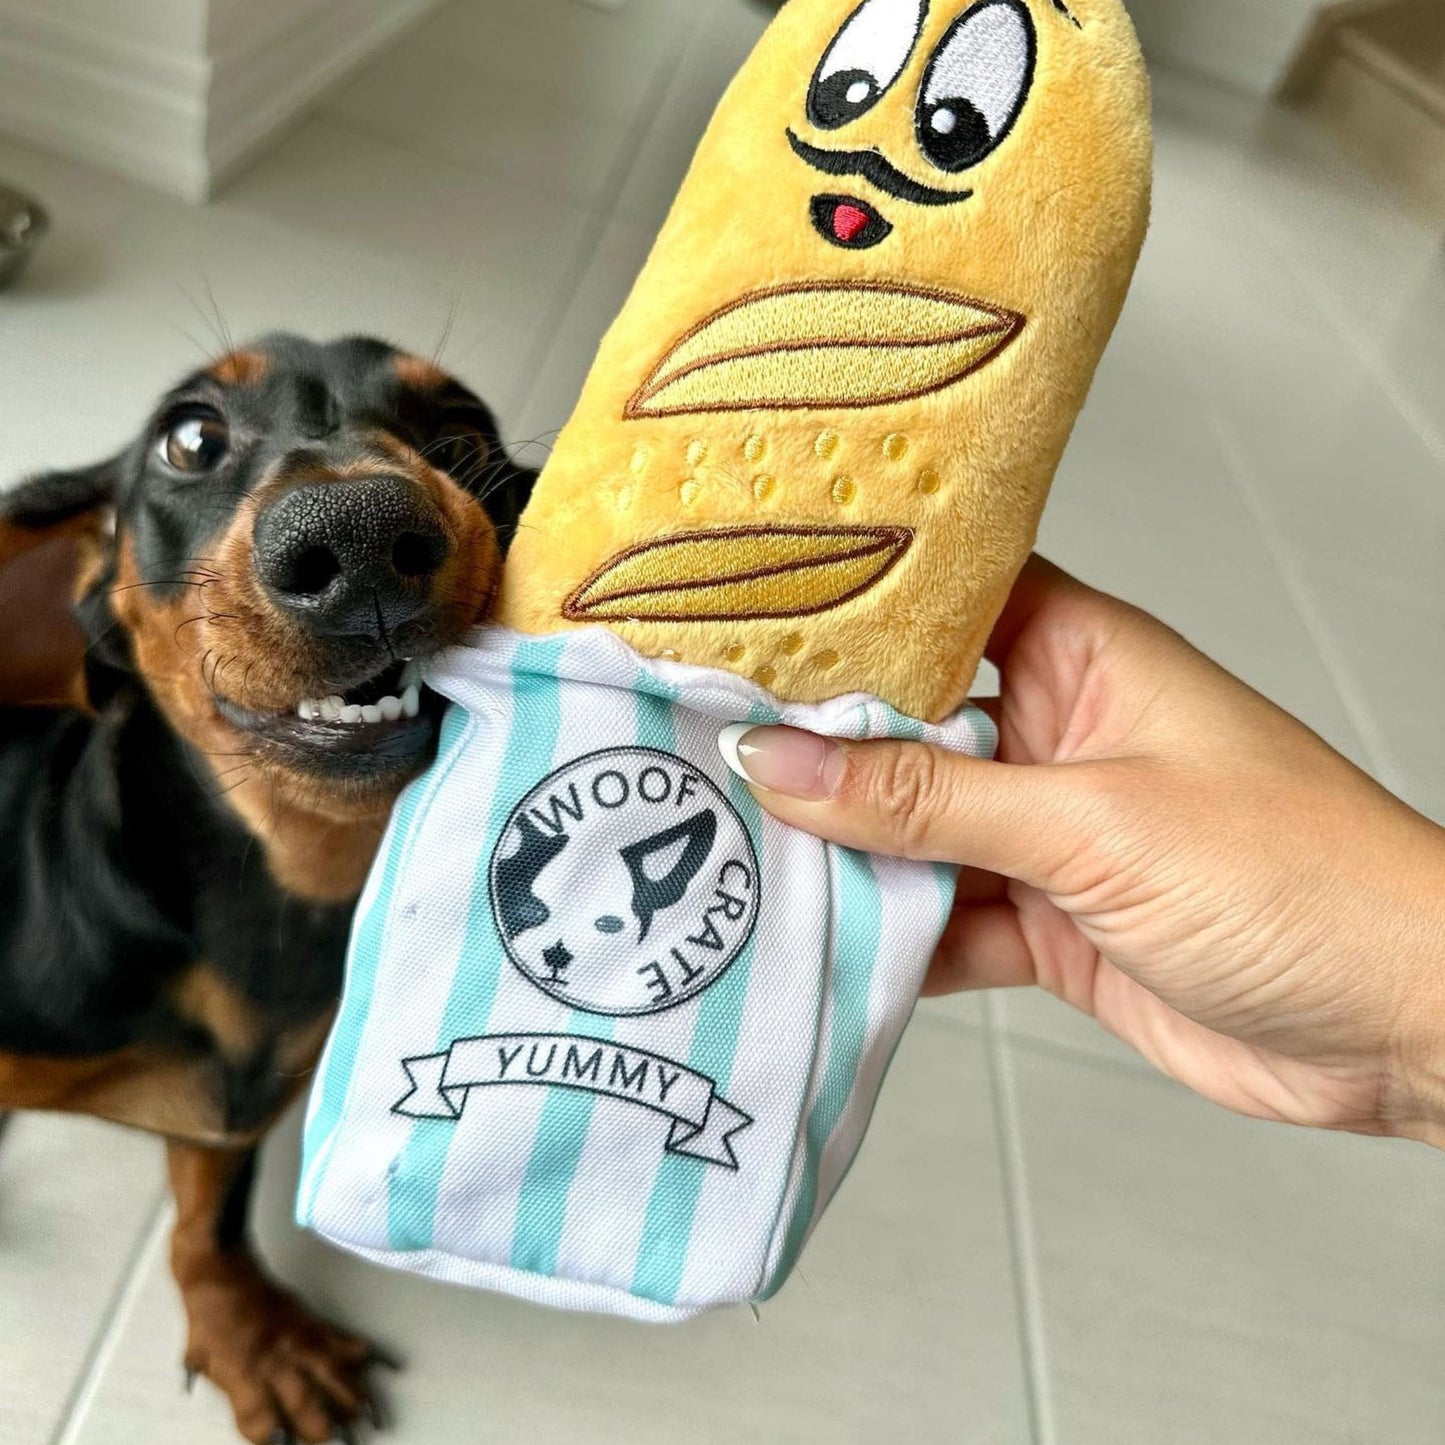 plush baguette being given to a dachshund dog.